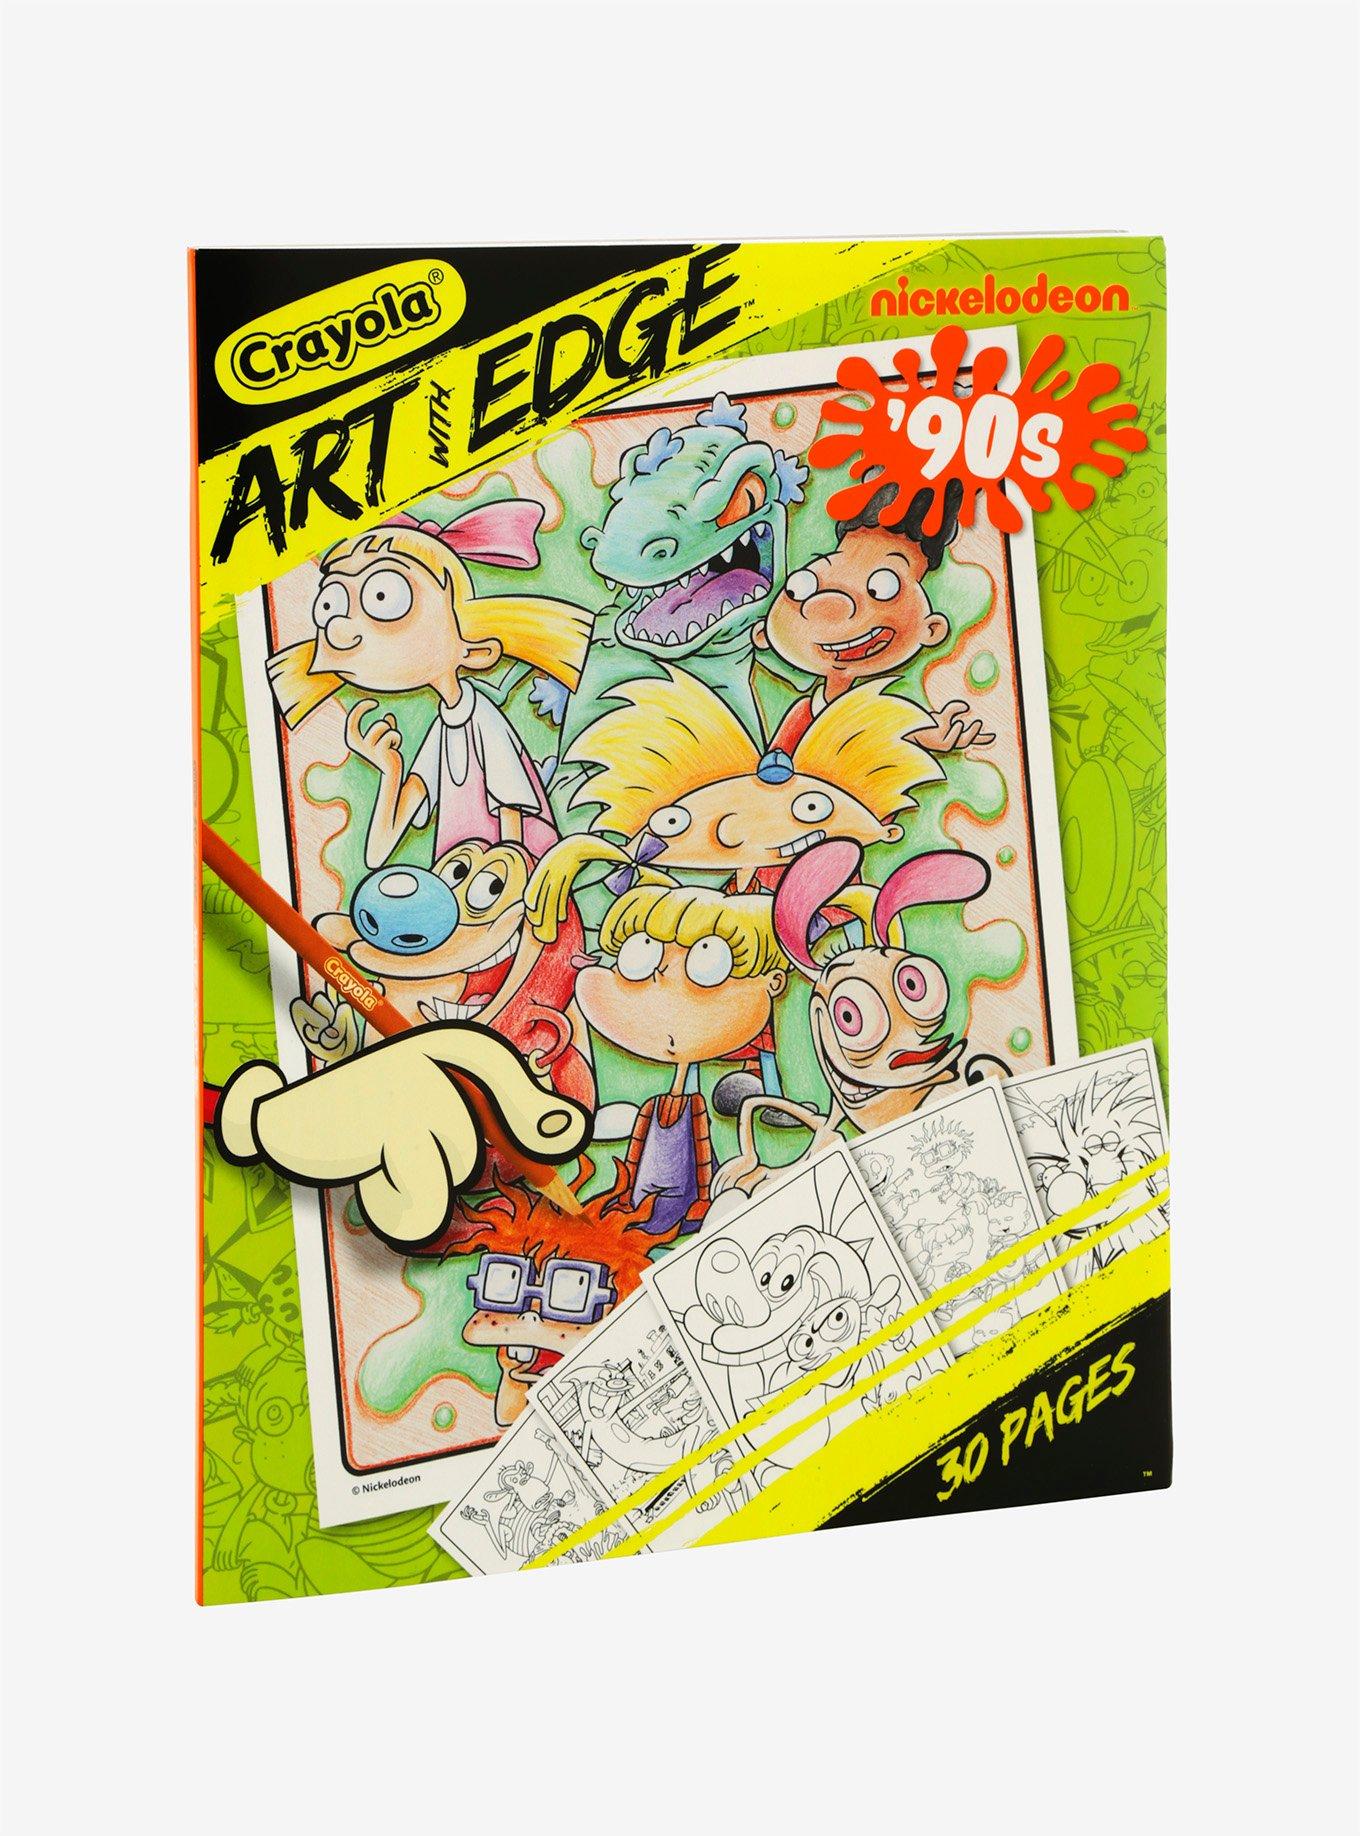 Crayola art with edge nickelodeon s coloring book